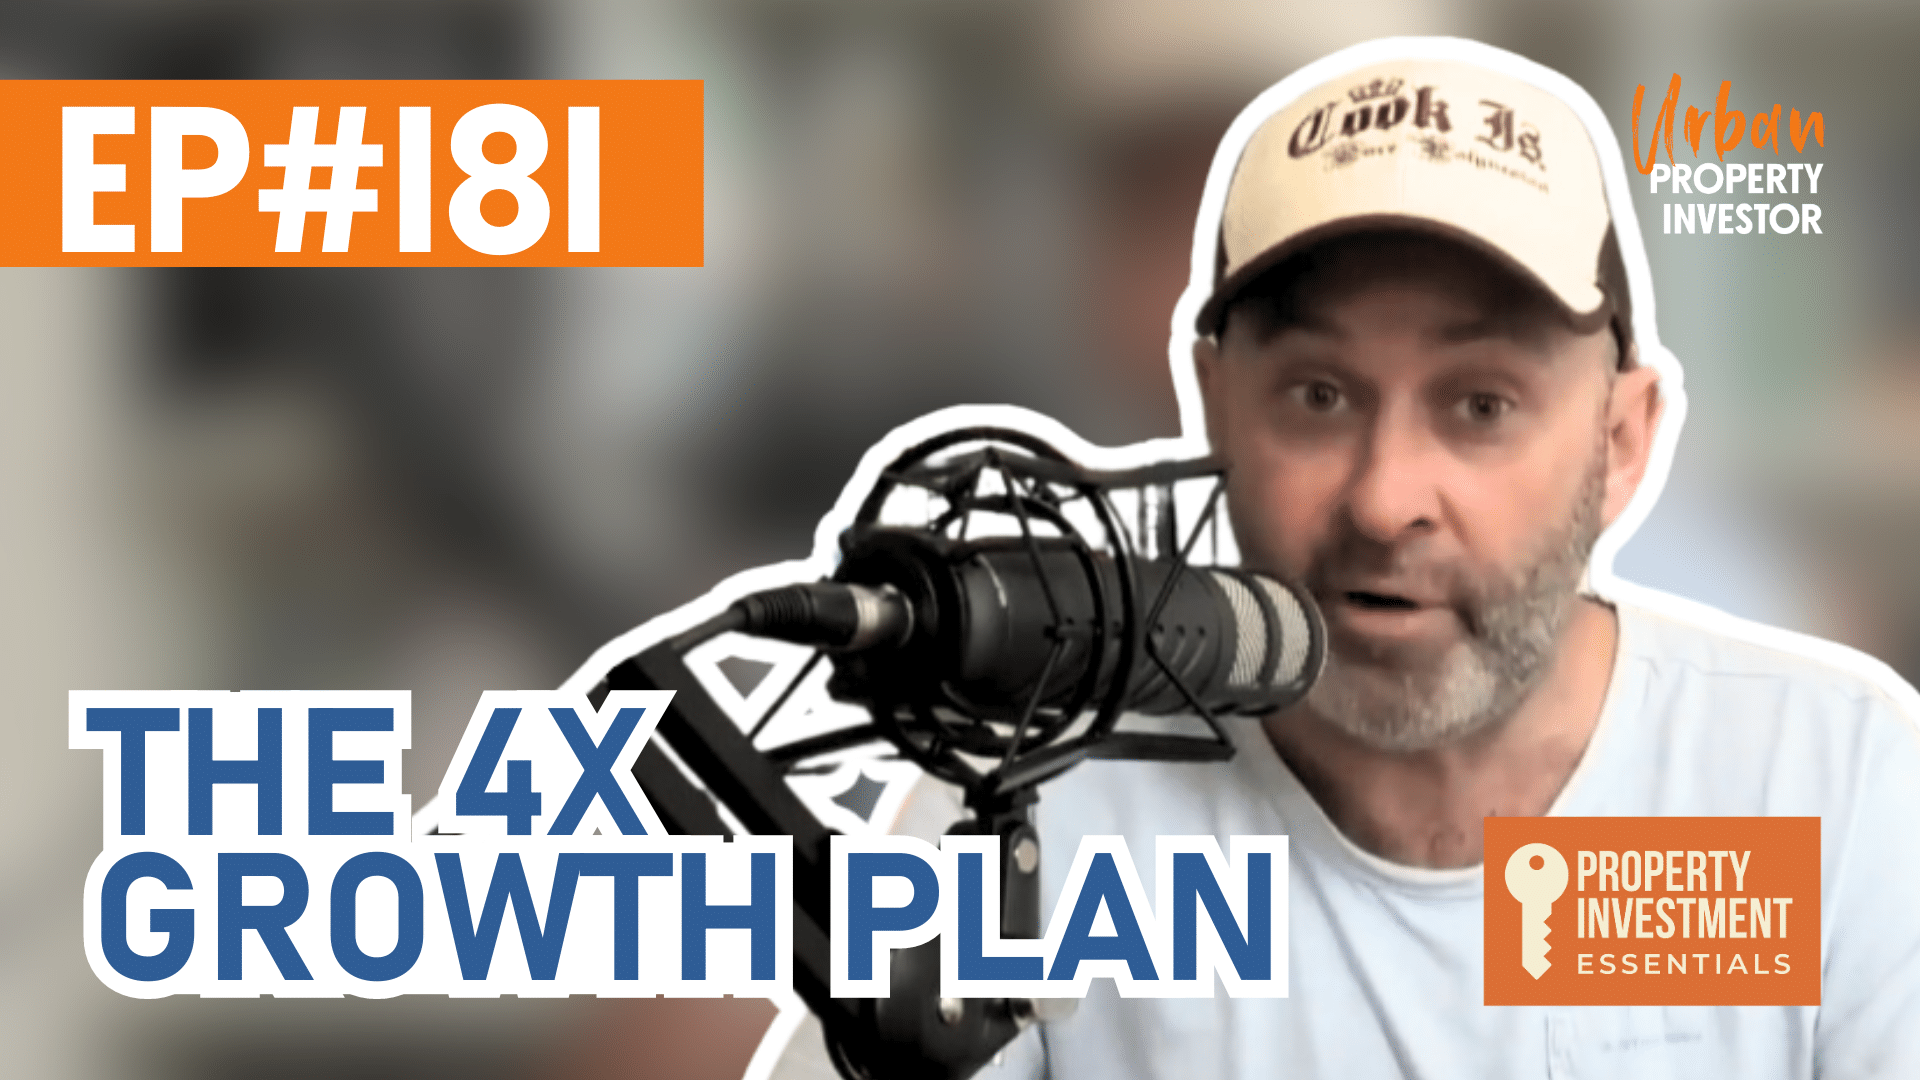 Best Of – Ep6 The 4 X Growth Plan